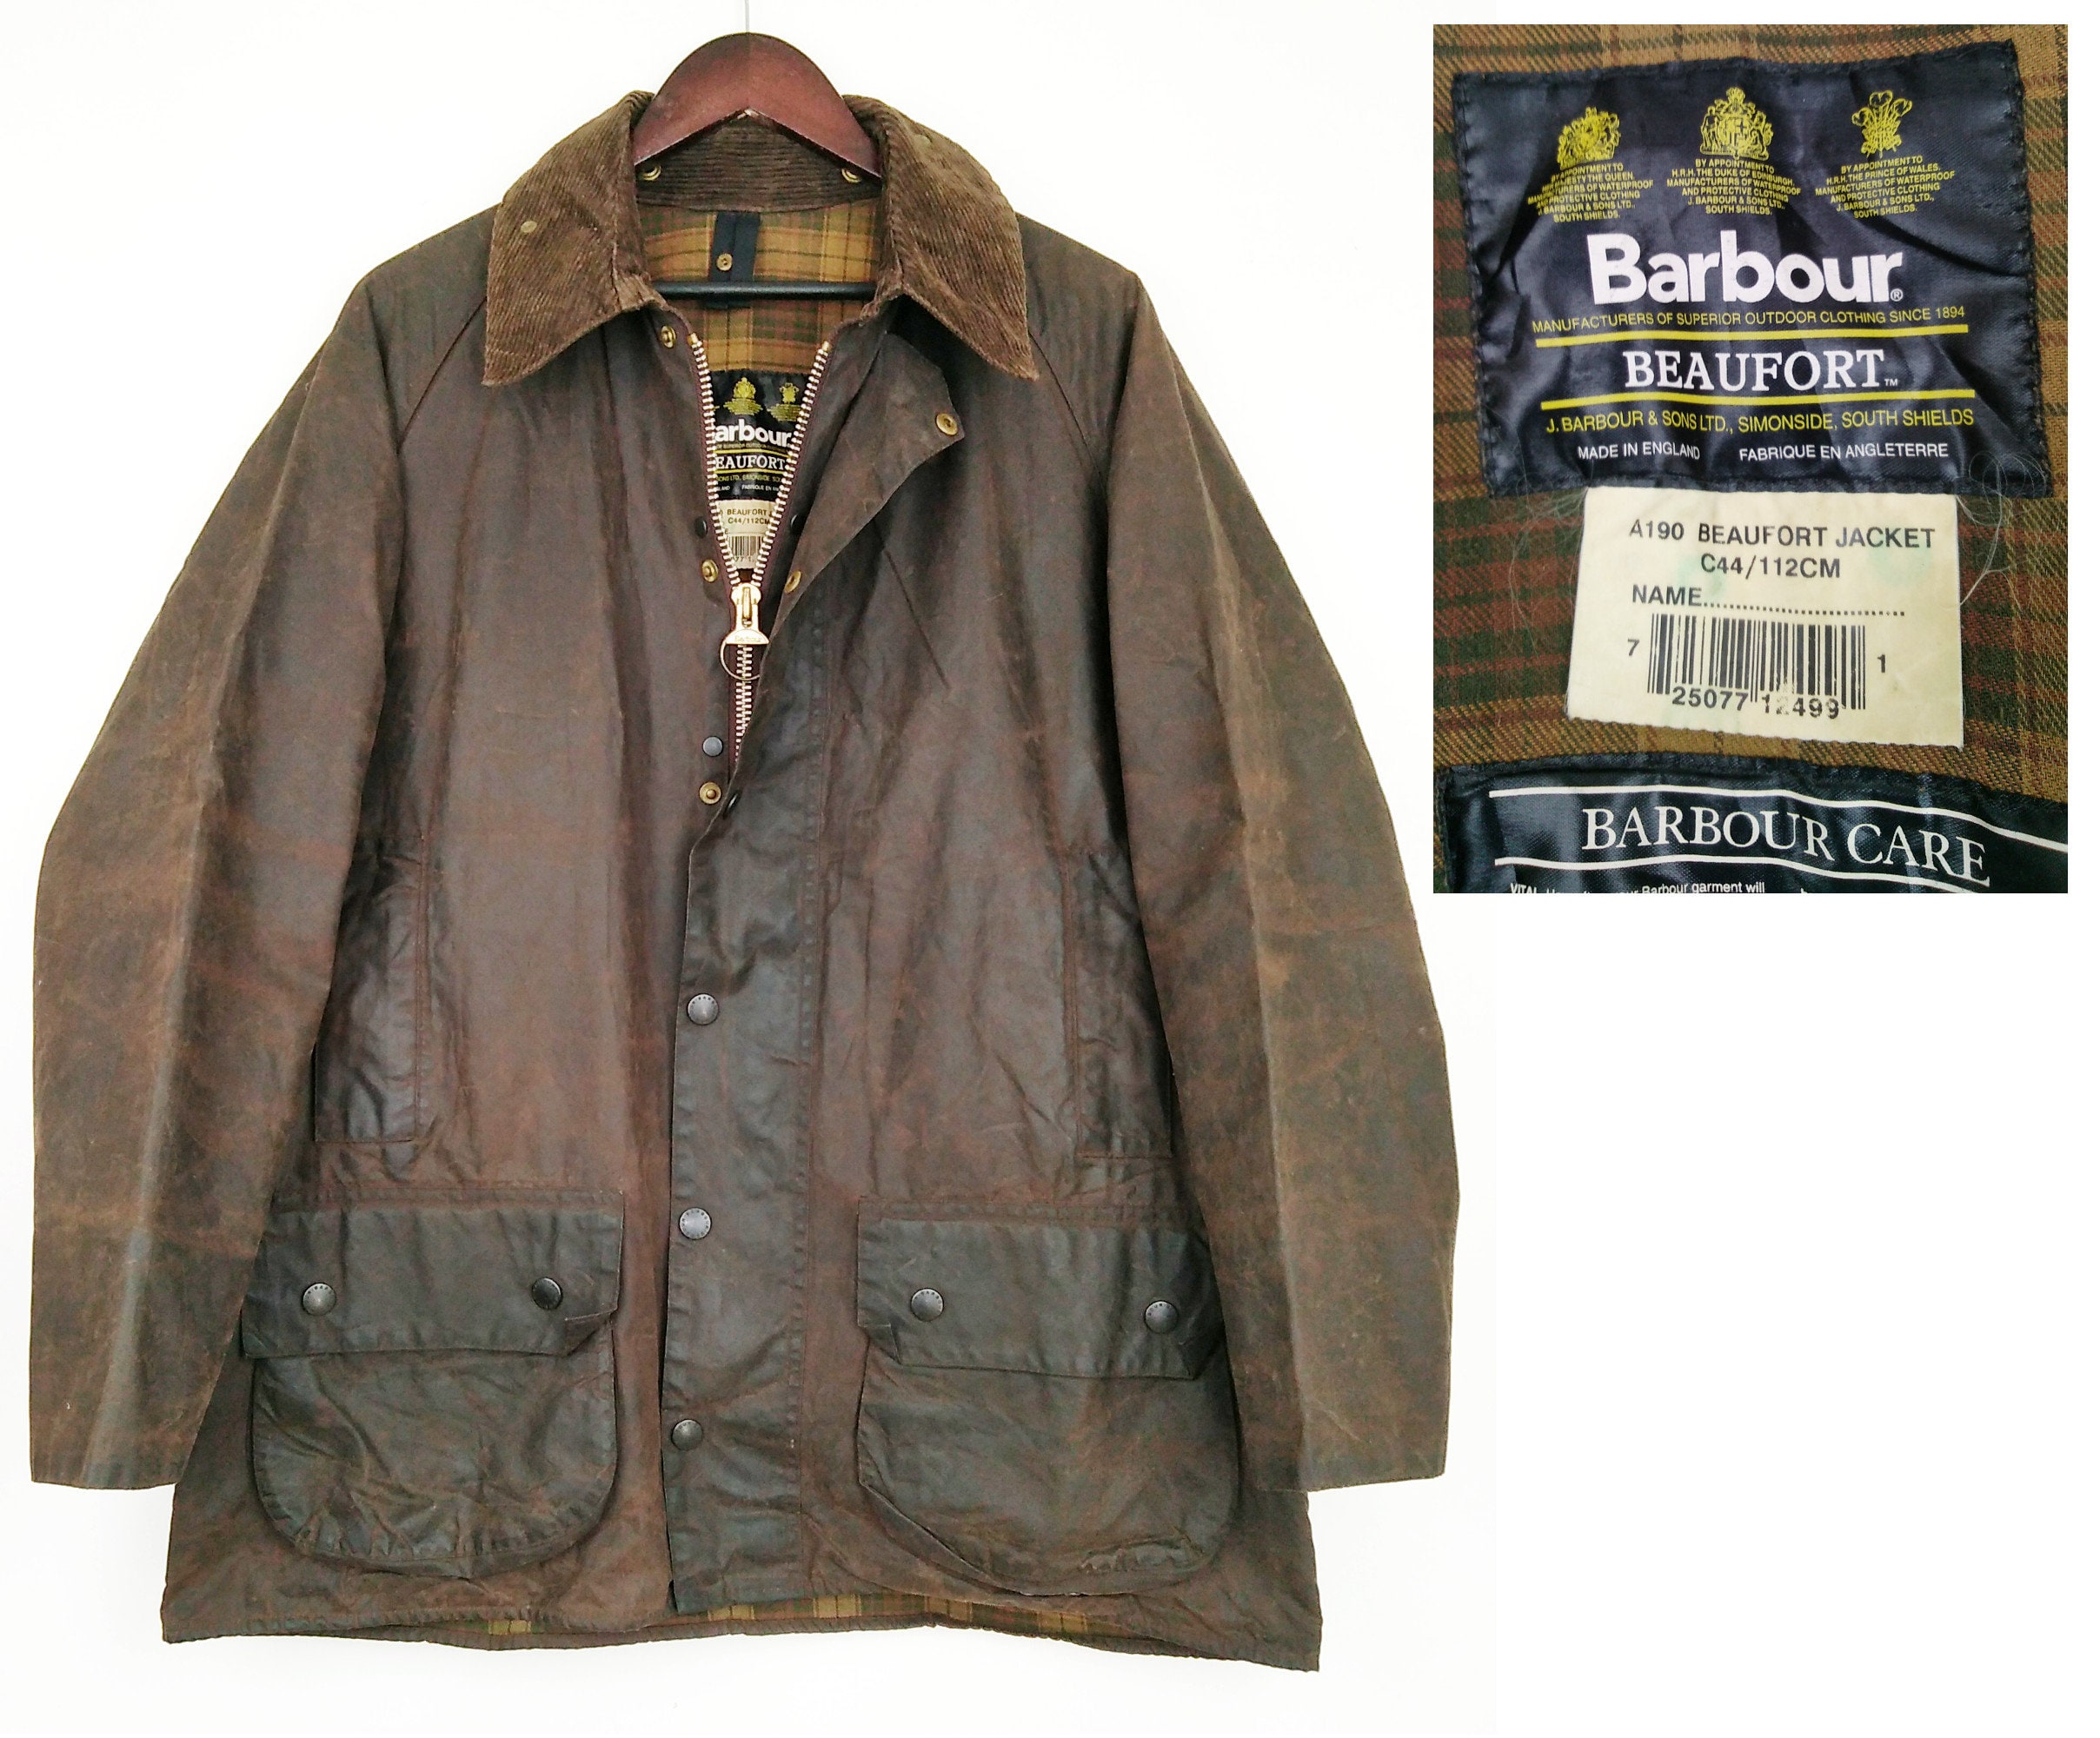 Barbour A190 Beaufort Jacket Rustic Waxed Cotton Vintage 90s - Etsy Ireland